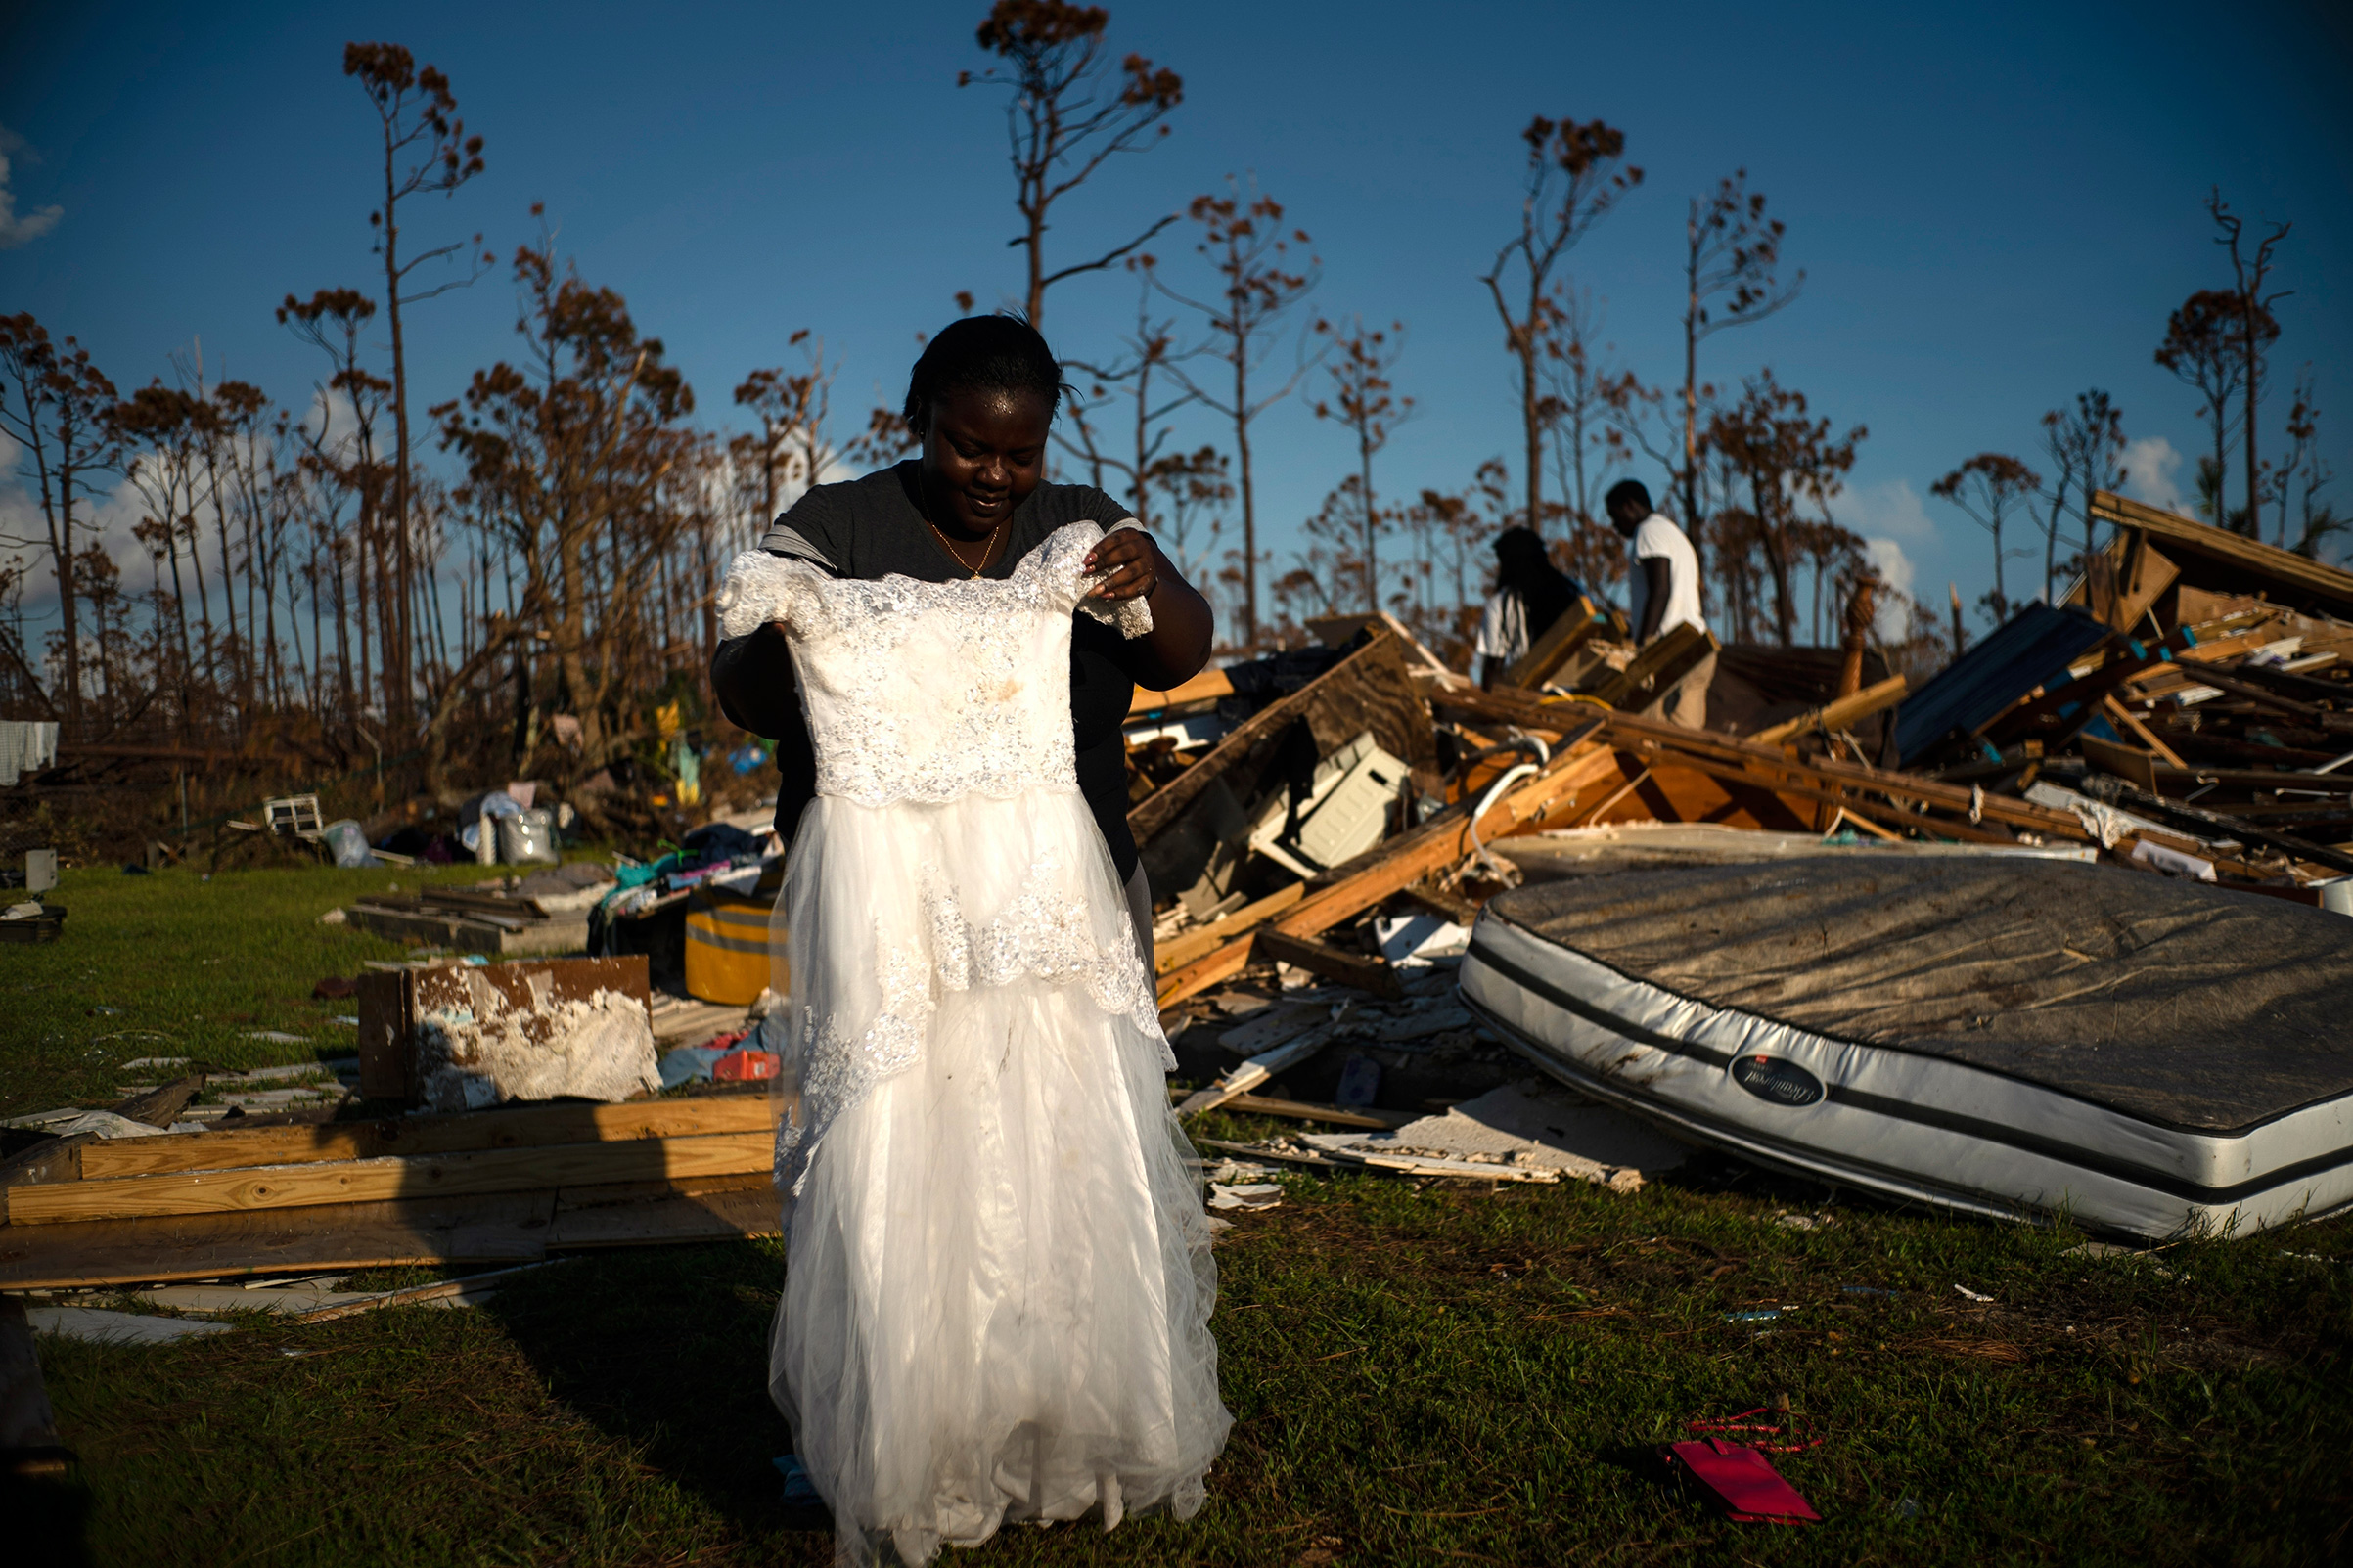 Synobia Reckley holds up the dress her niece wore as a flower girl at her wedding, as she goes through valuables in the rubble of her home destroyed one week ago by Hurricane Dorian in Rocky Creek East End, Grand Bahama, Bahamas, Sept. 8, 2019. (Ramon Espinosa—AP)